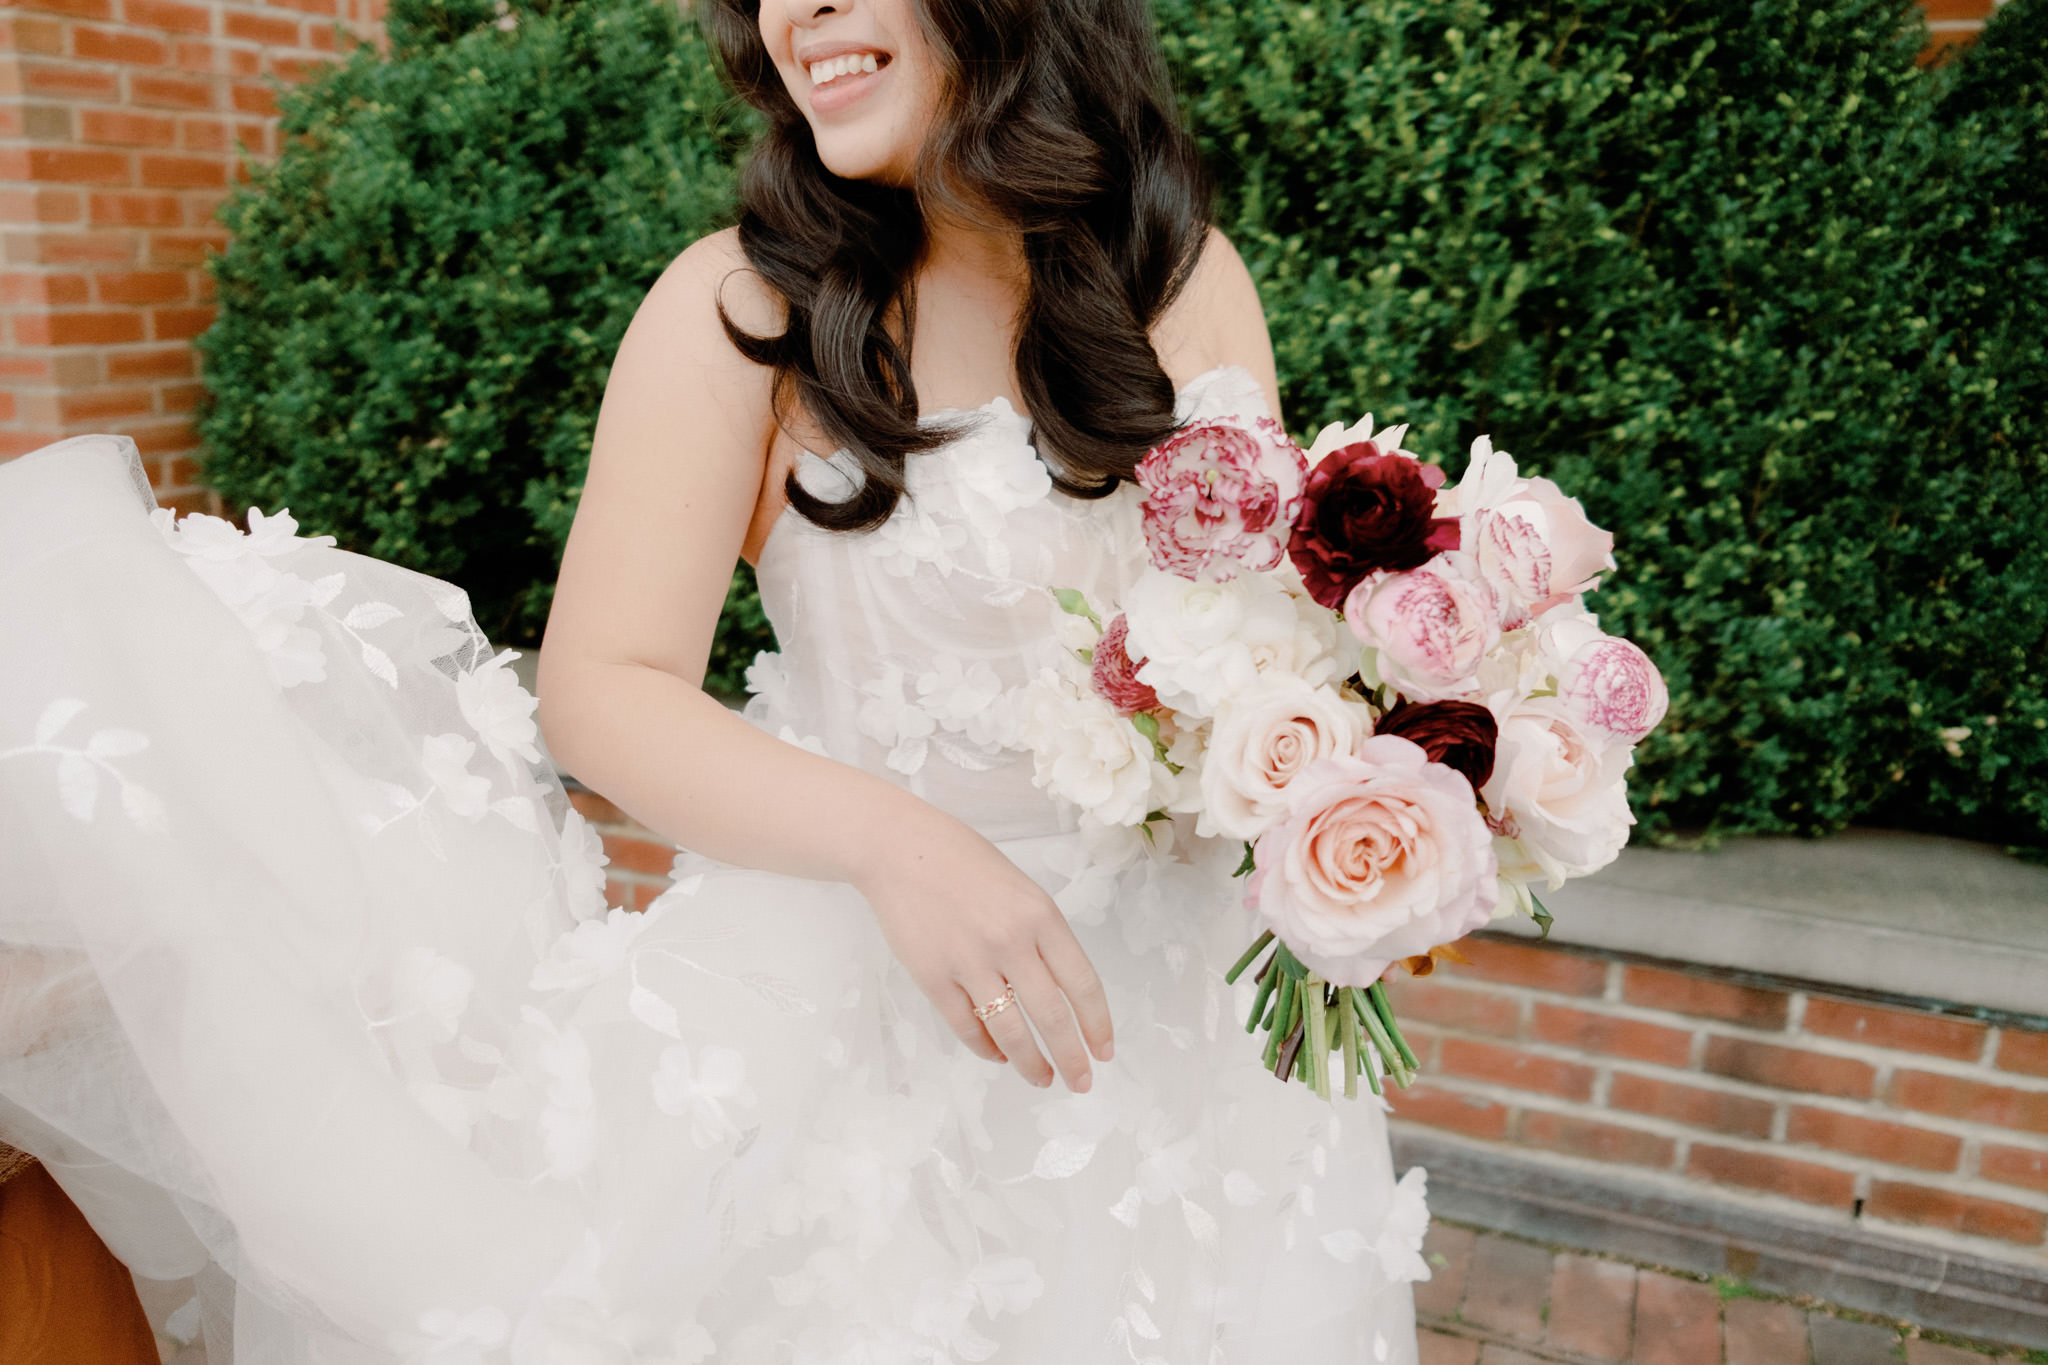 The bride is smiling while holding her pretty bouquet. 2023 wedding dress image by Jenny Fu Studio